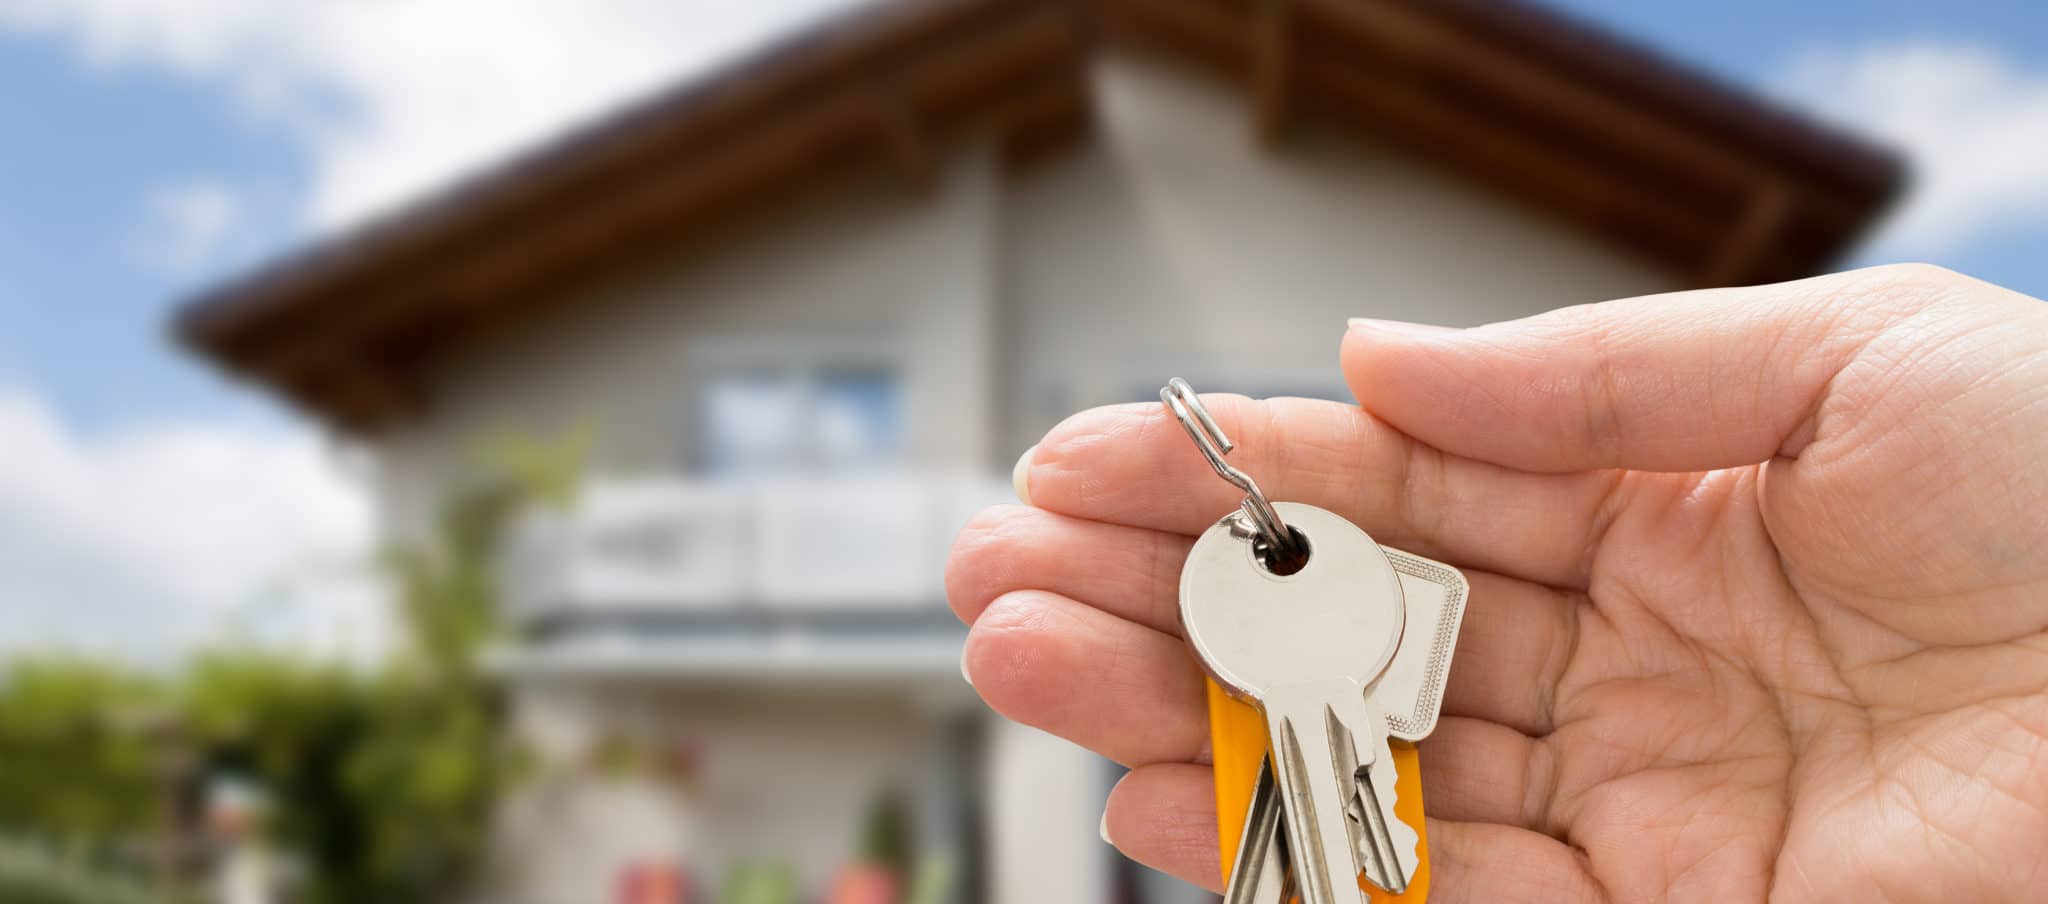 Person holding keys to their new home after purchase on the real estate market.